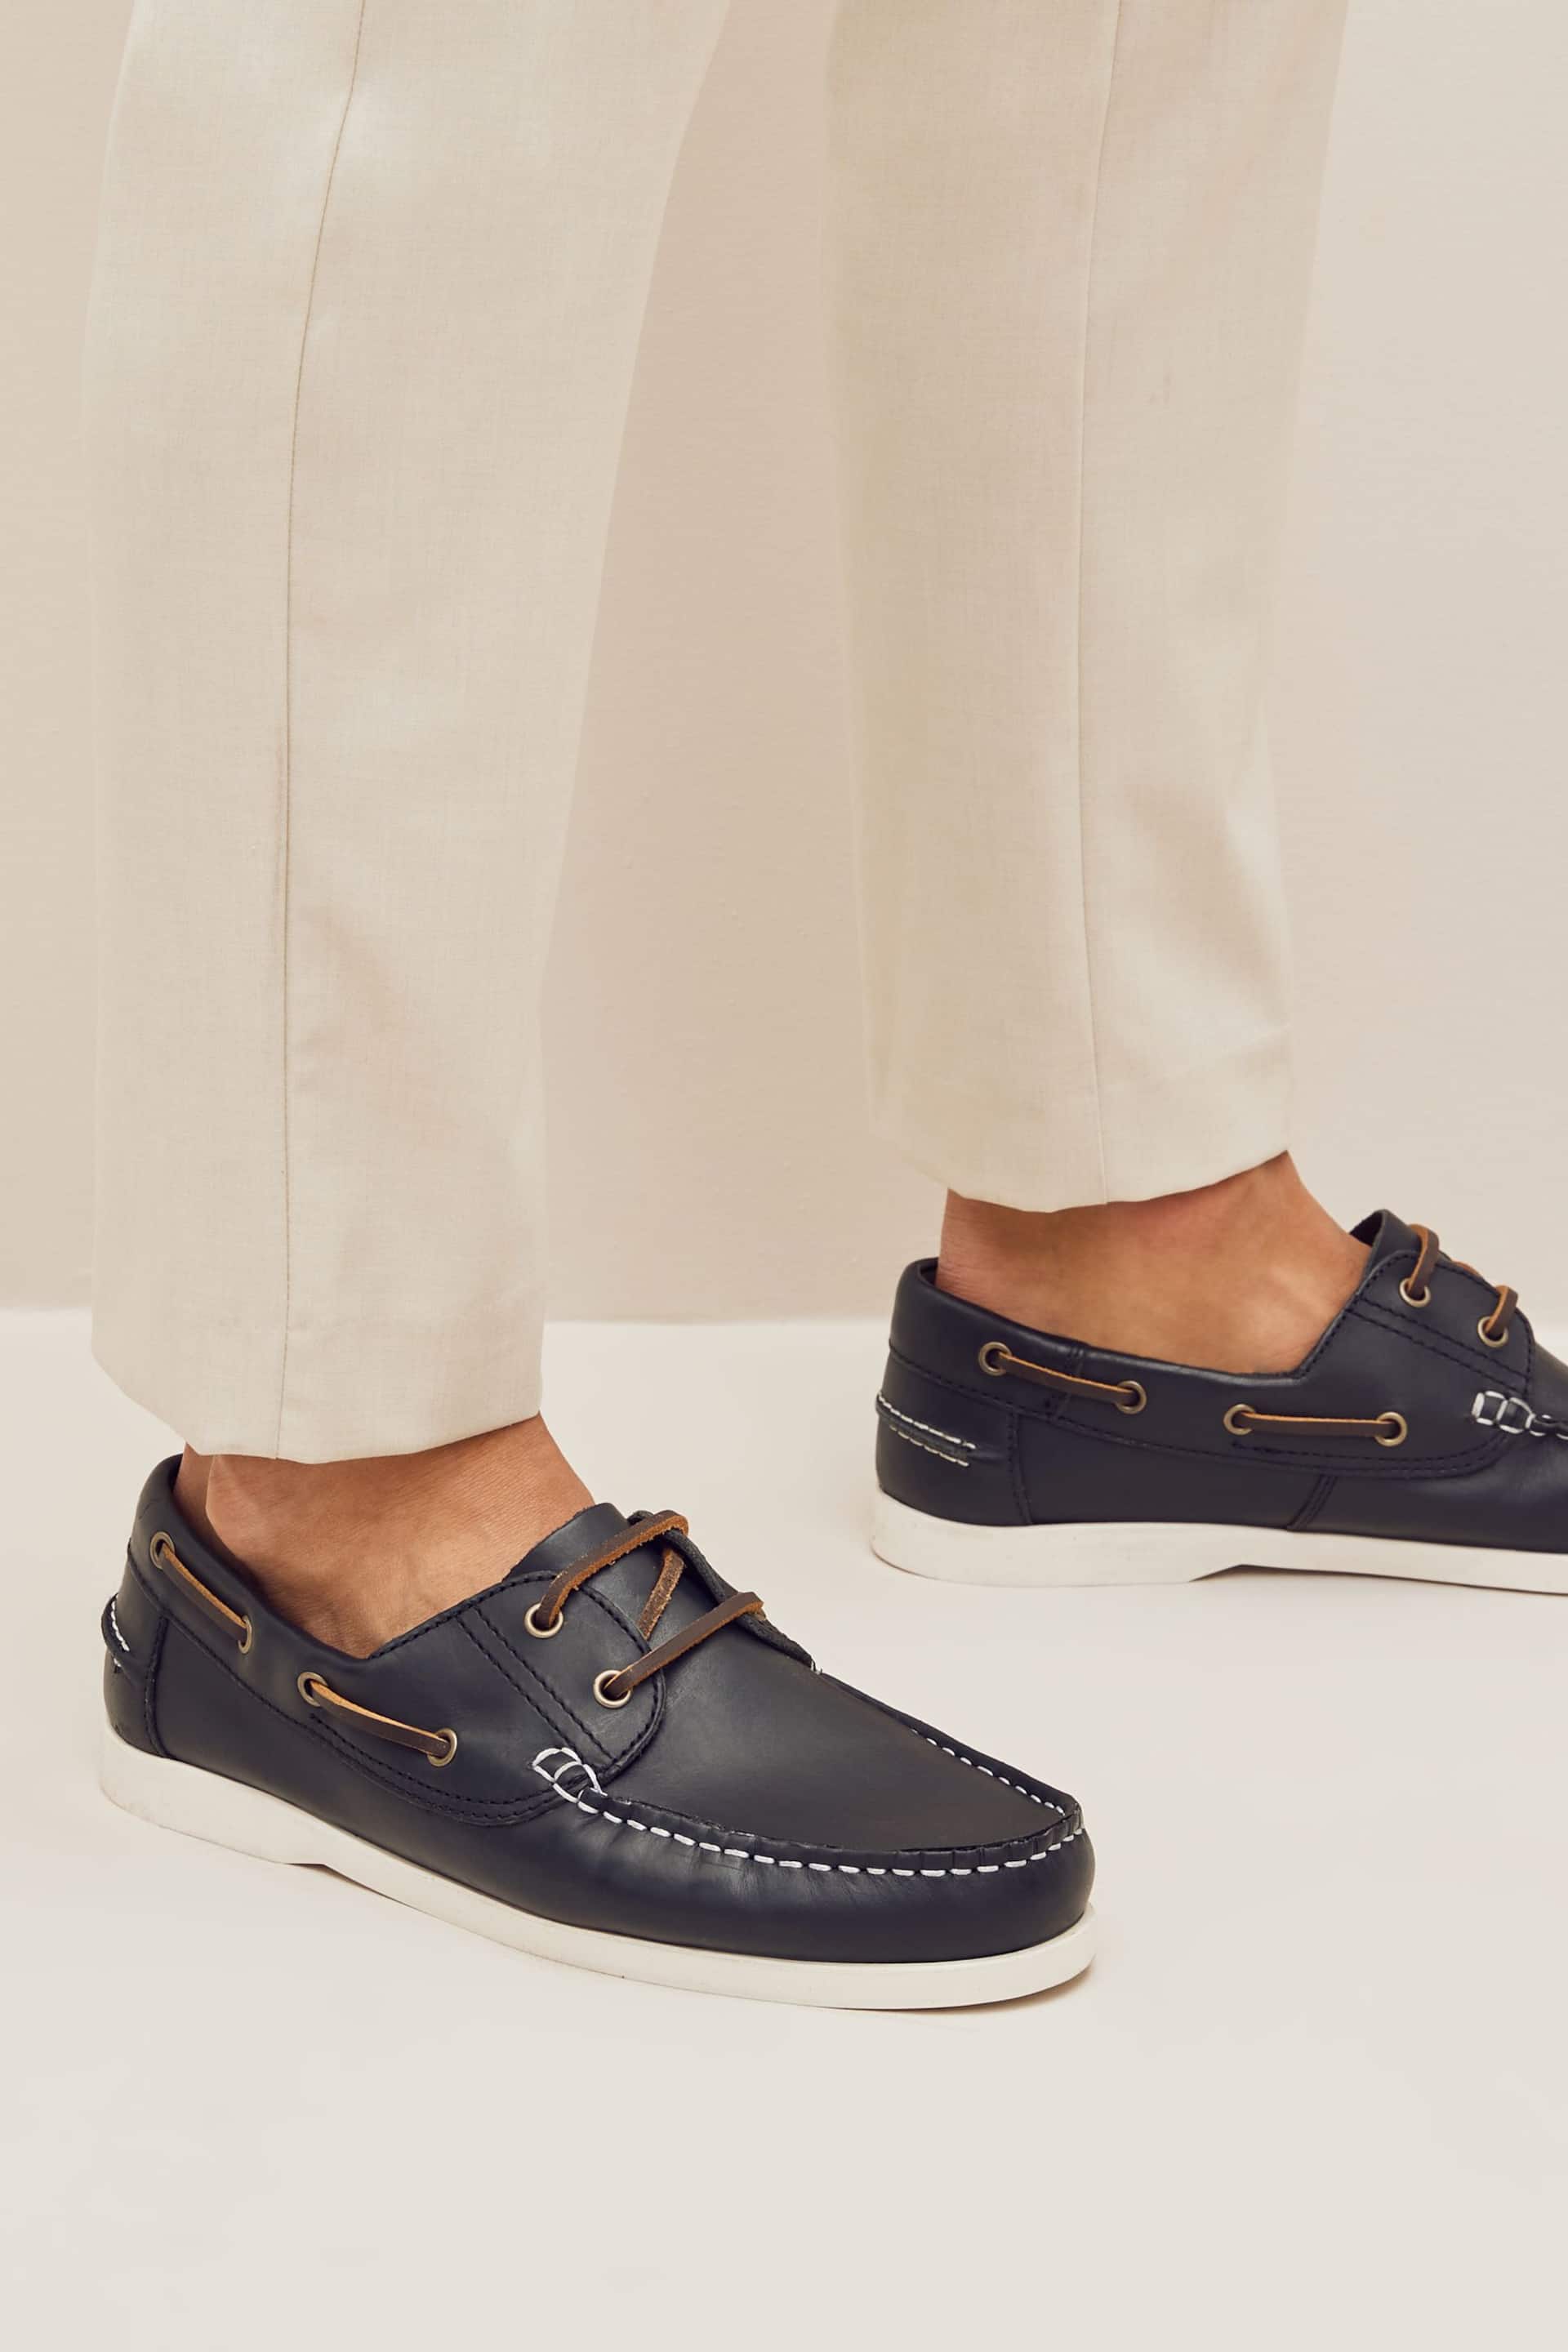 Navy Classic Leather Boat Shoes - Image 1 of 7